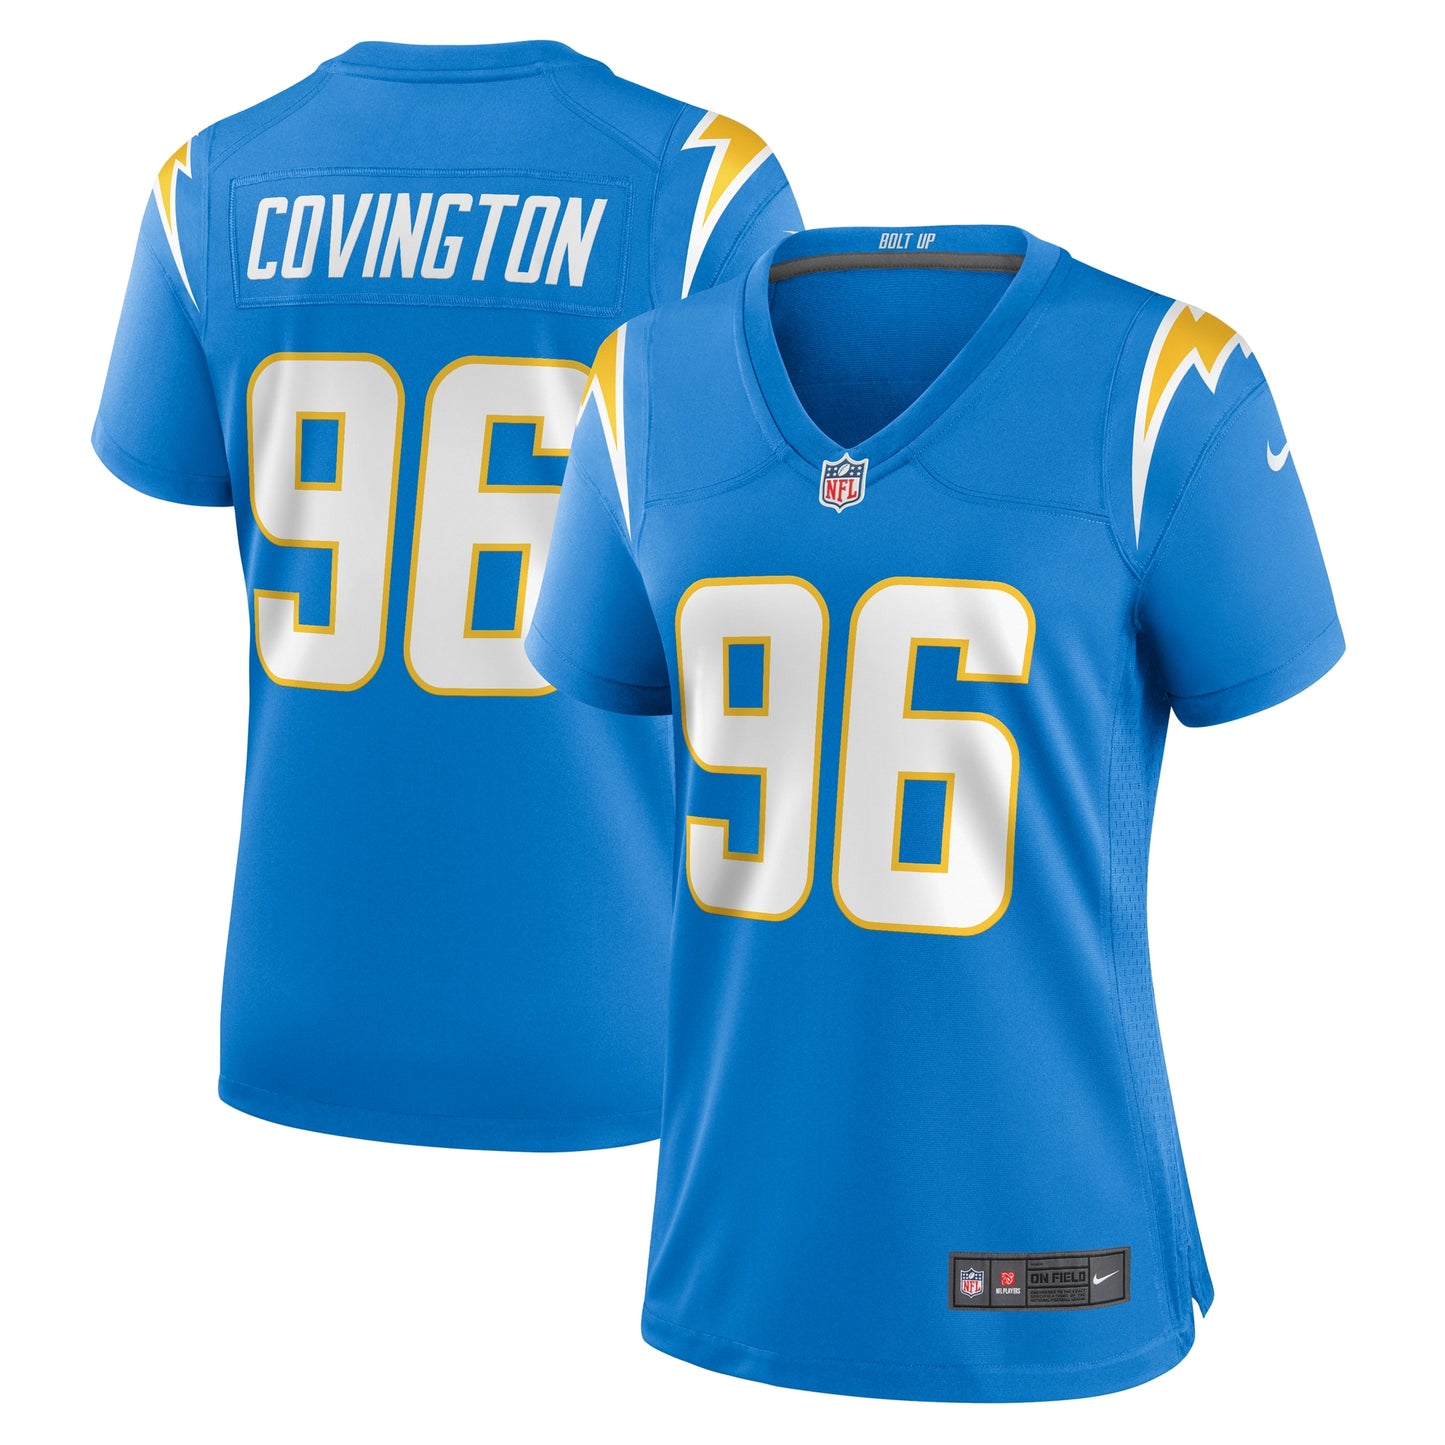 Christian Covington Los Angeles Chargers Nike Women's Team Game Jersey -  Powder Blue